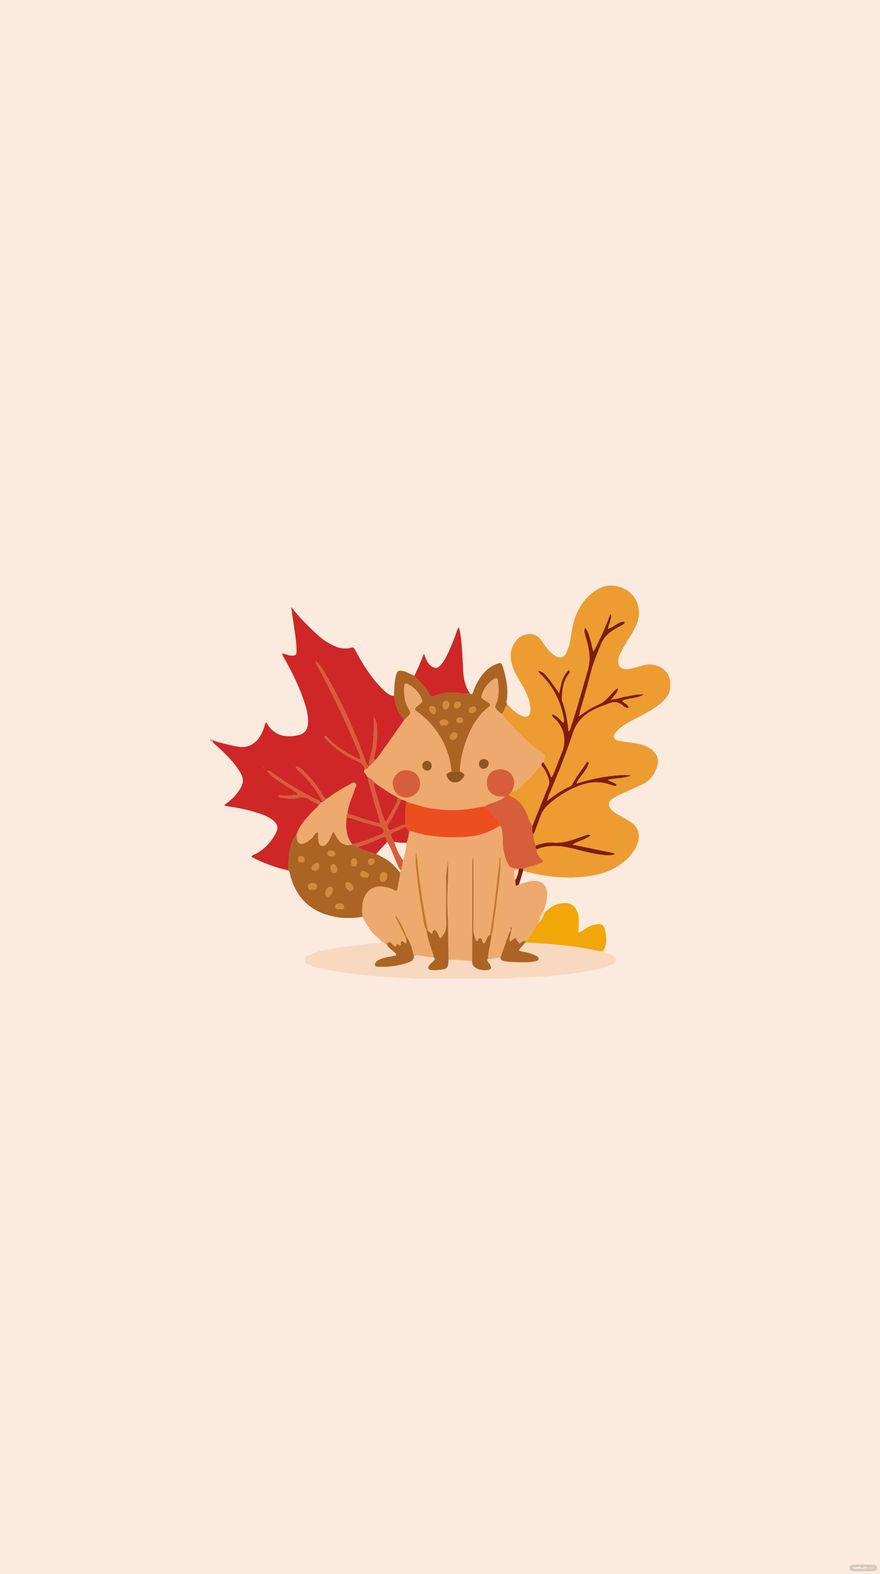 Free Autumn iPhone Background in PDF, Illustrator, PSD, EPS, SVG, JPG, PNG